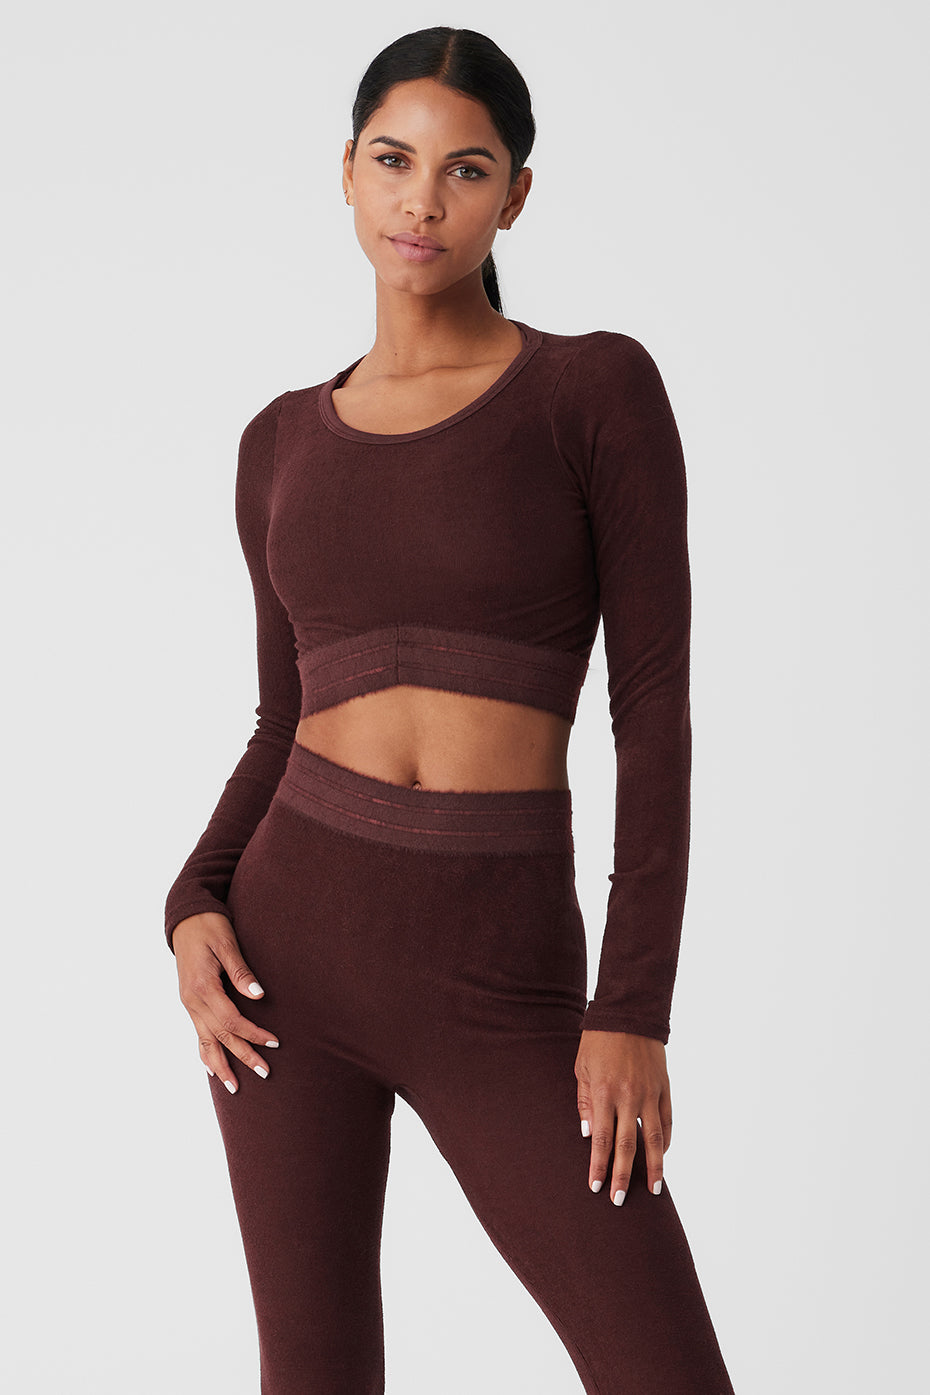 Alo Yoga NWT  Alo Seamless Luxe Terry High Waist Cuddle Legging Size XS -  $71 New With Tags - From Eco